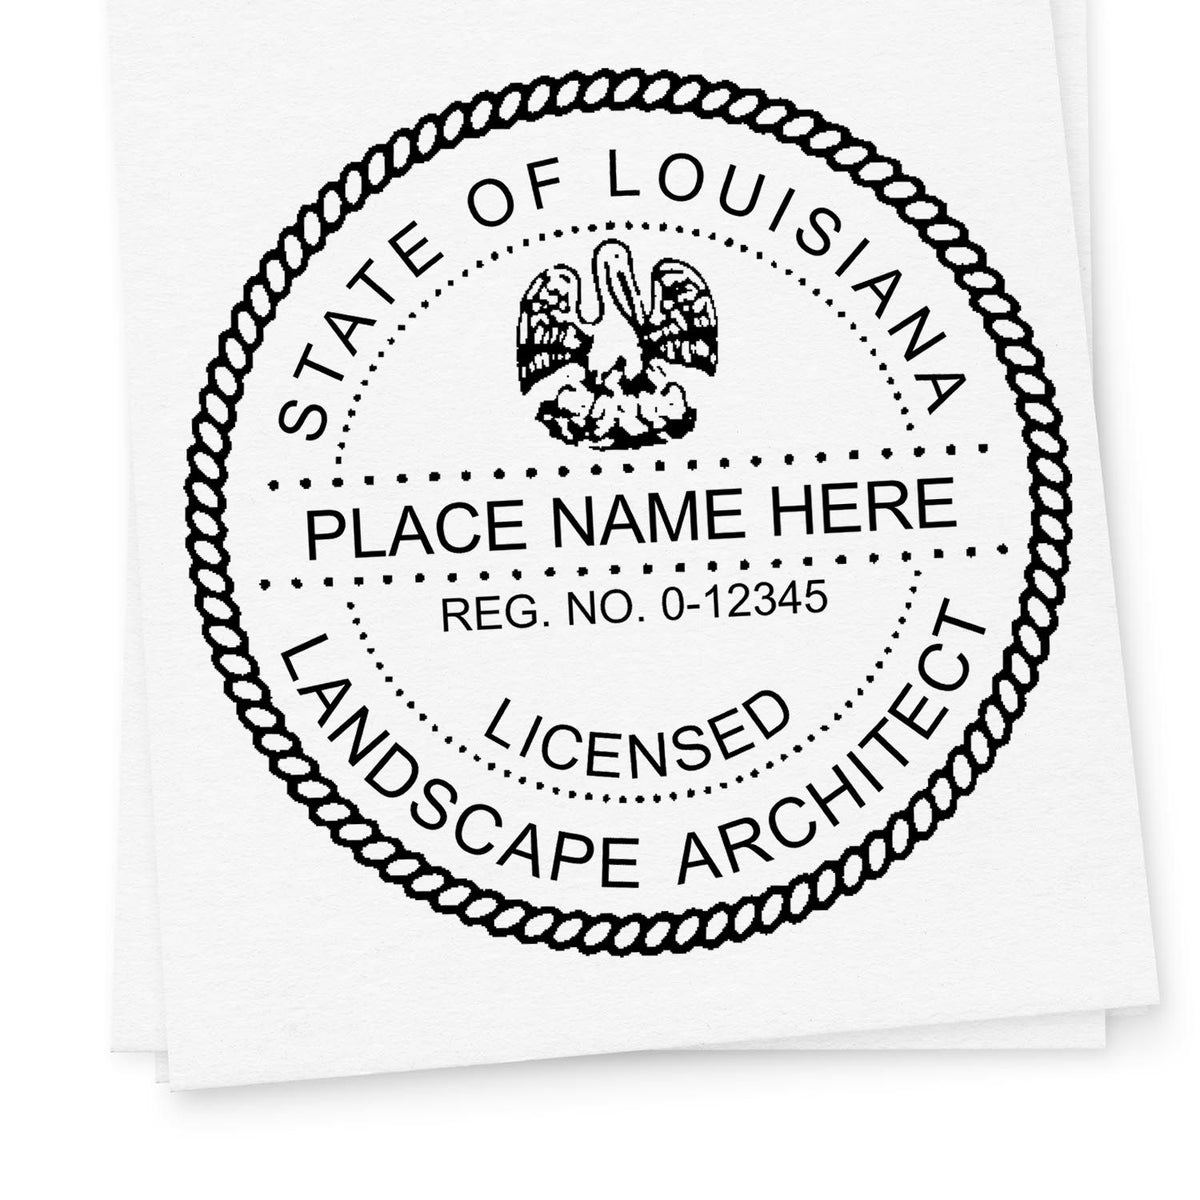 Premium MaxLight Pre-Inked Louisiana Landscape Architectural Stamp in use photo showing a stamped imprint of the Premium MaxLight Pre-Inked Louisiana Landscape Architectural Stamp